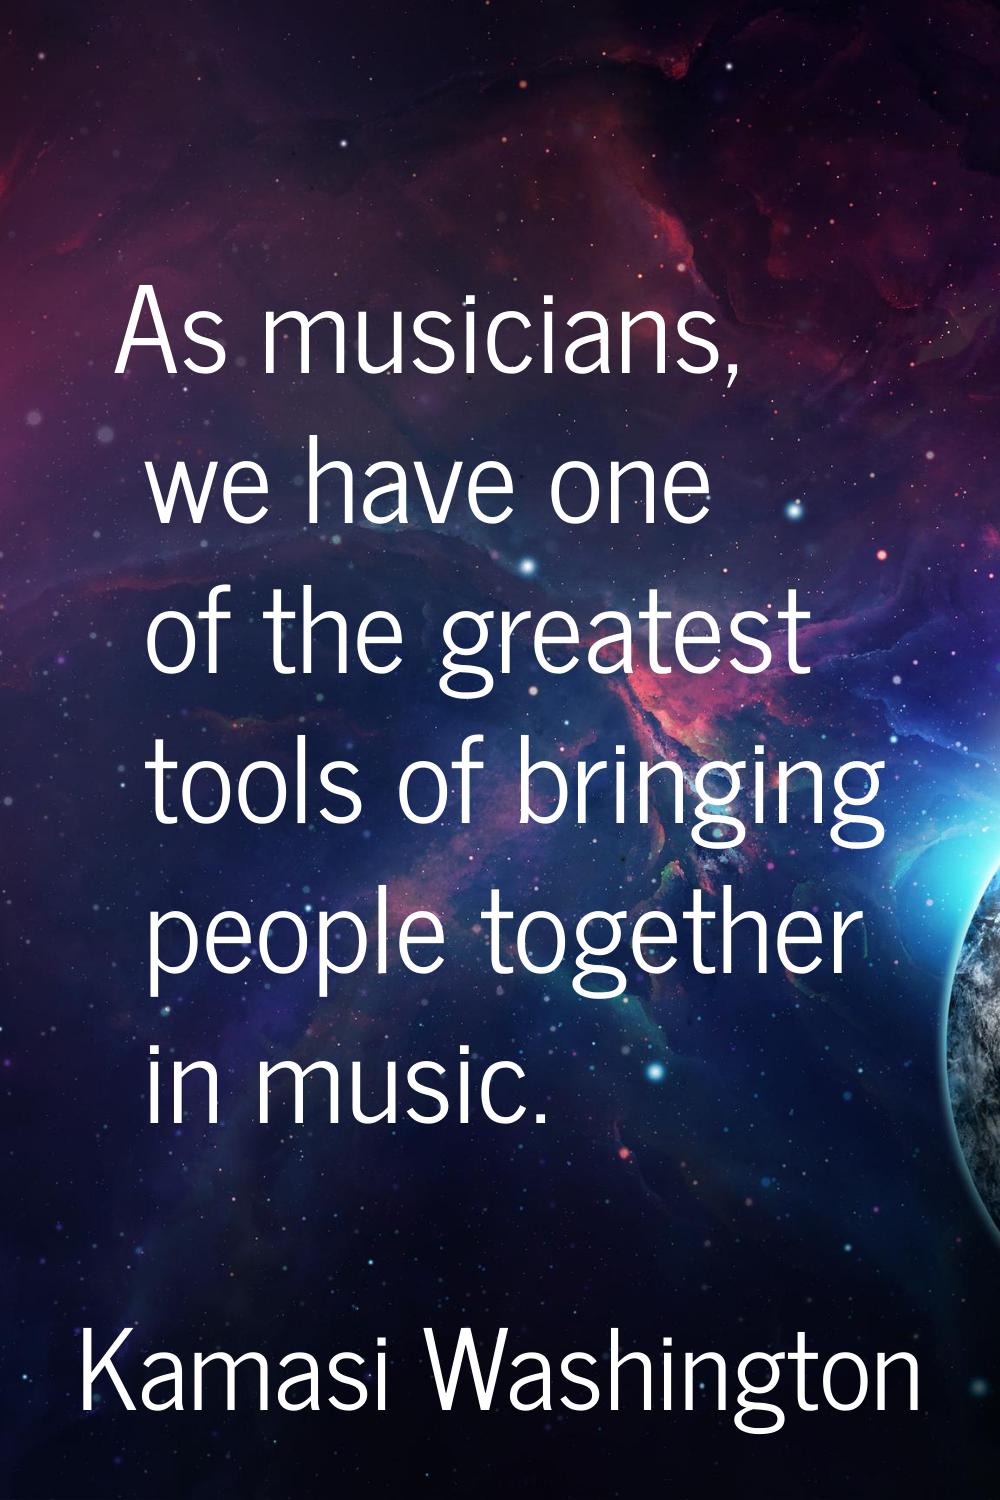 As musicians, we have one of the greatest tools of bringing people together in music.